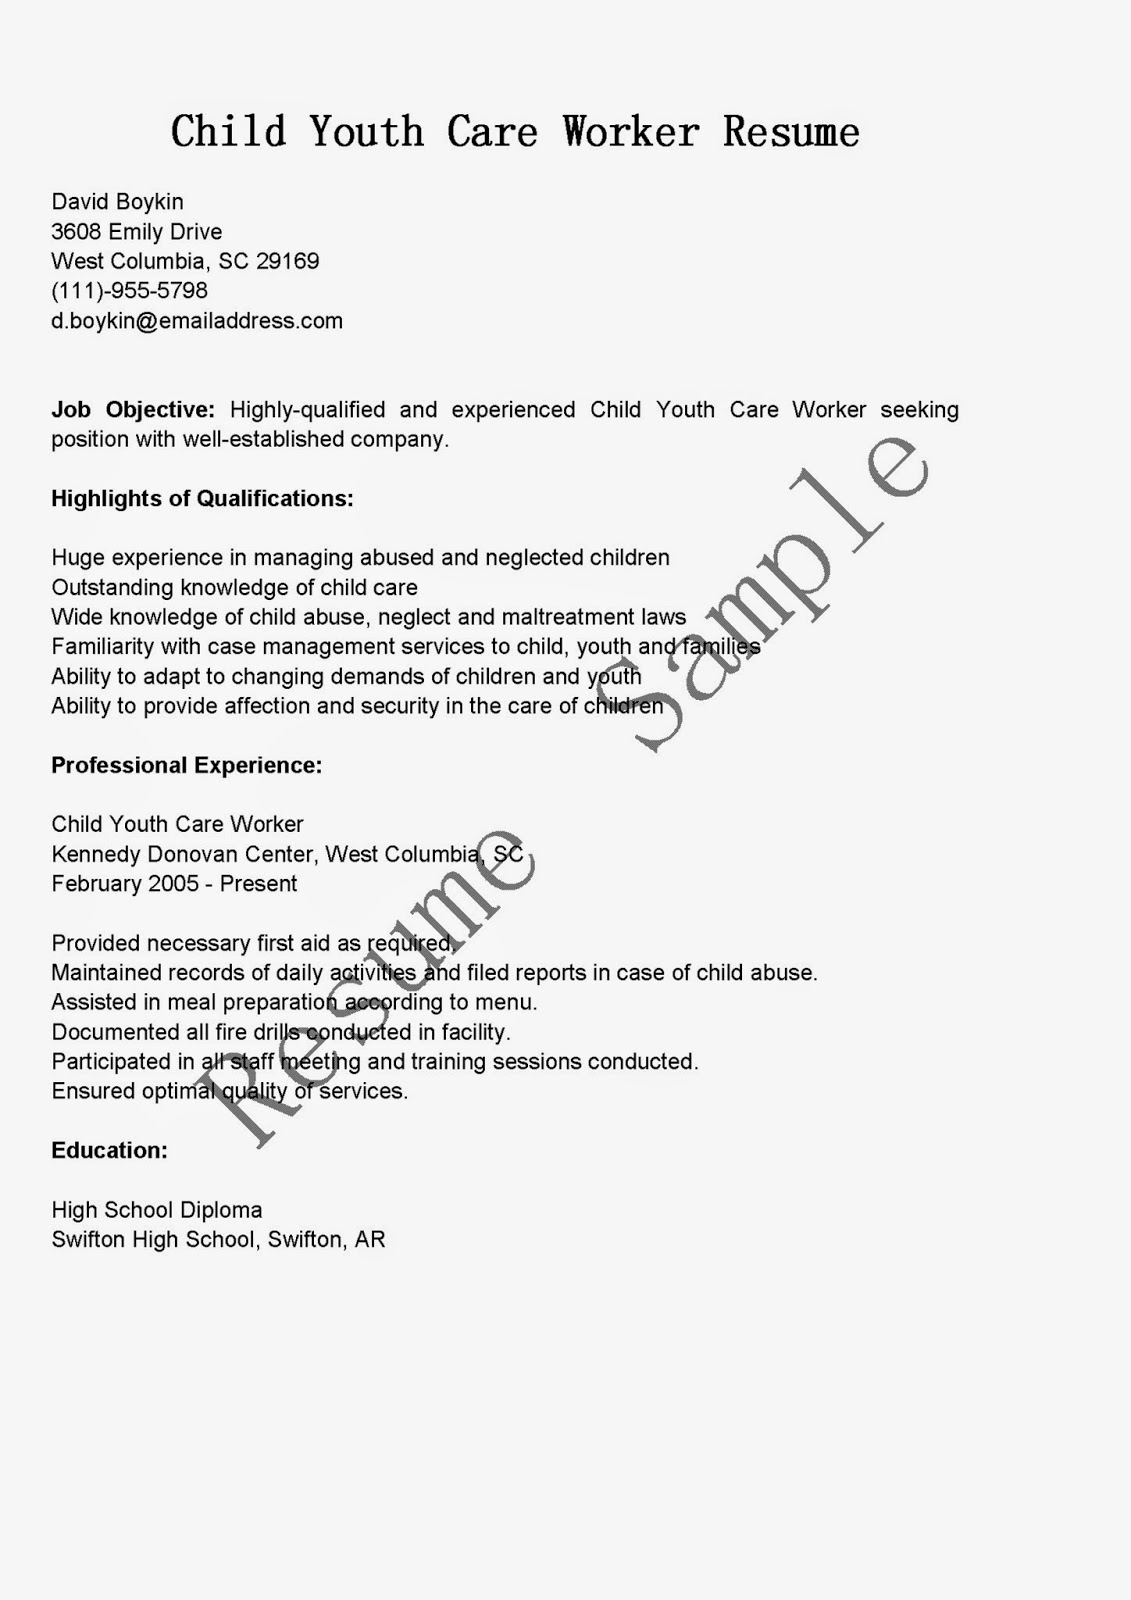 Childcare experience on resume